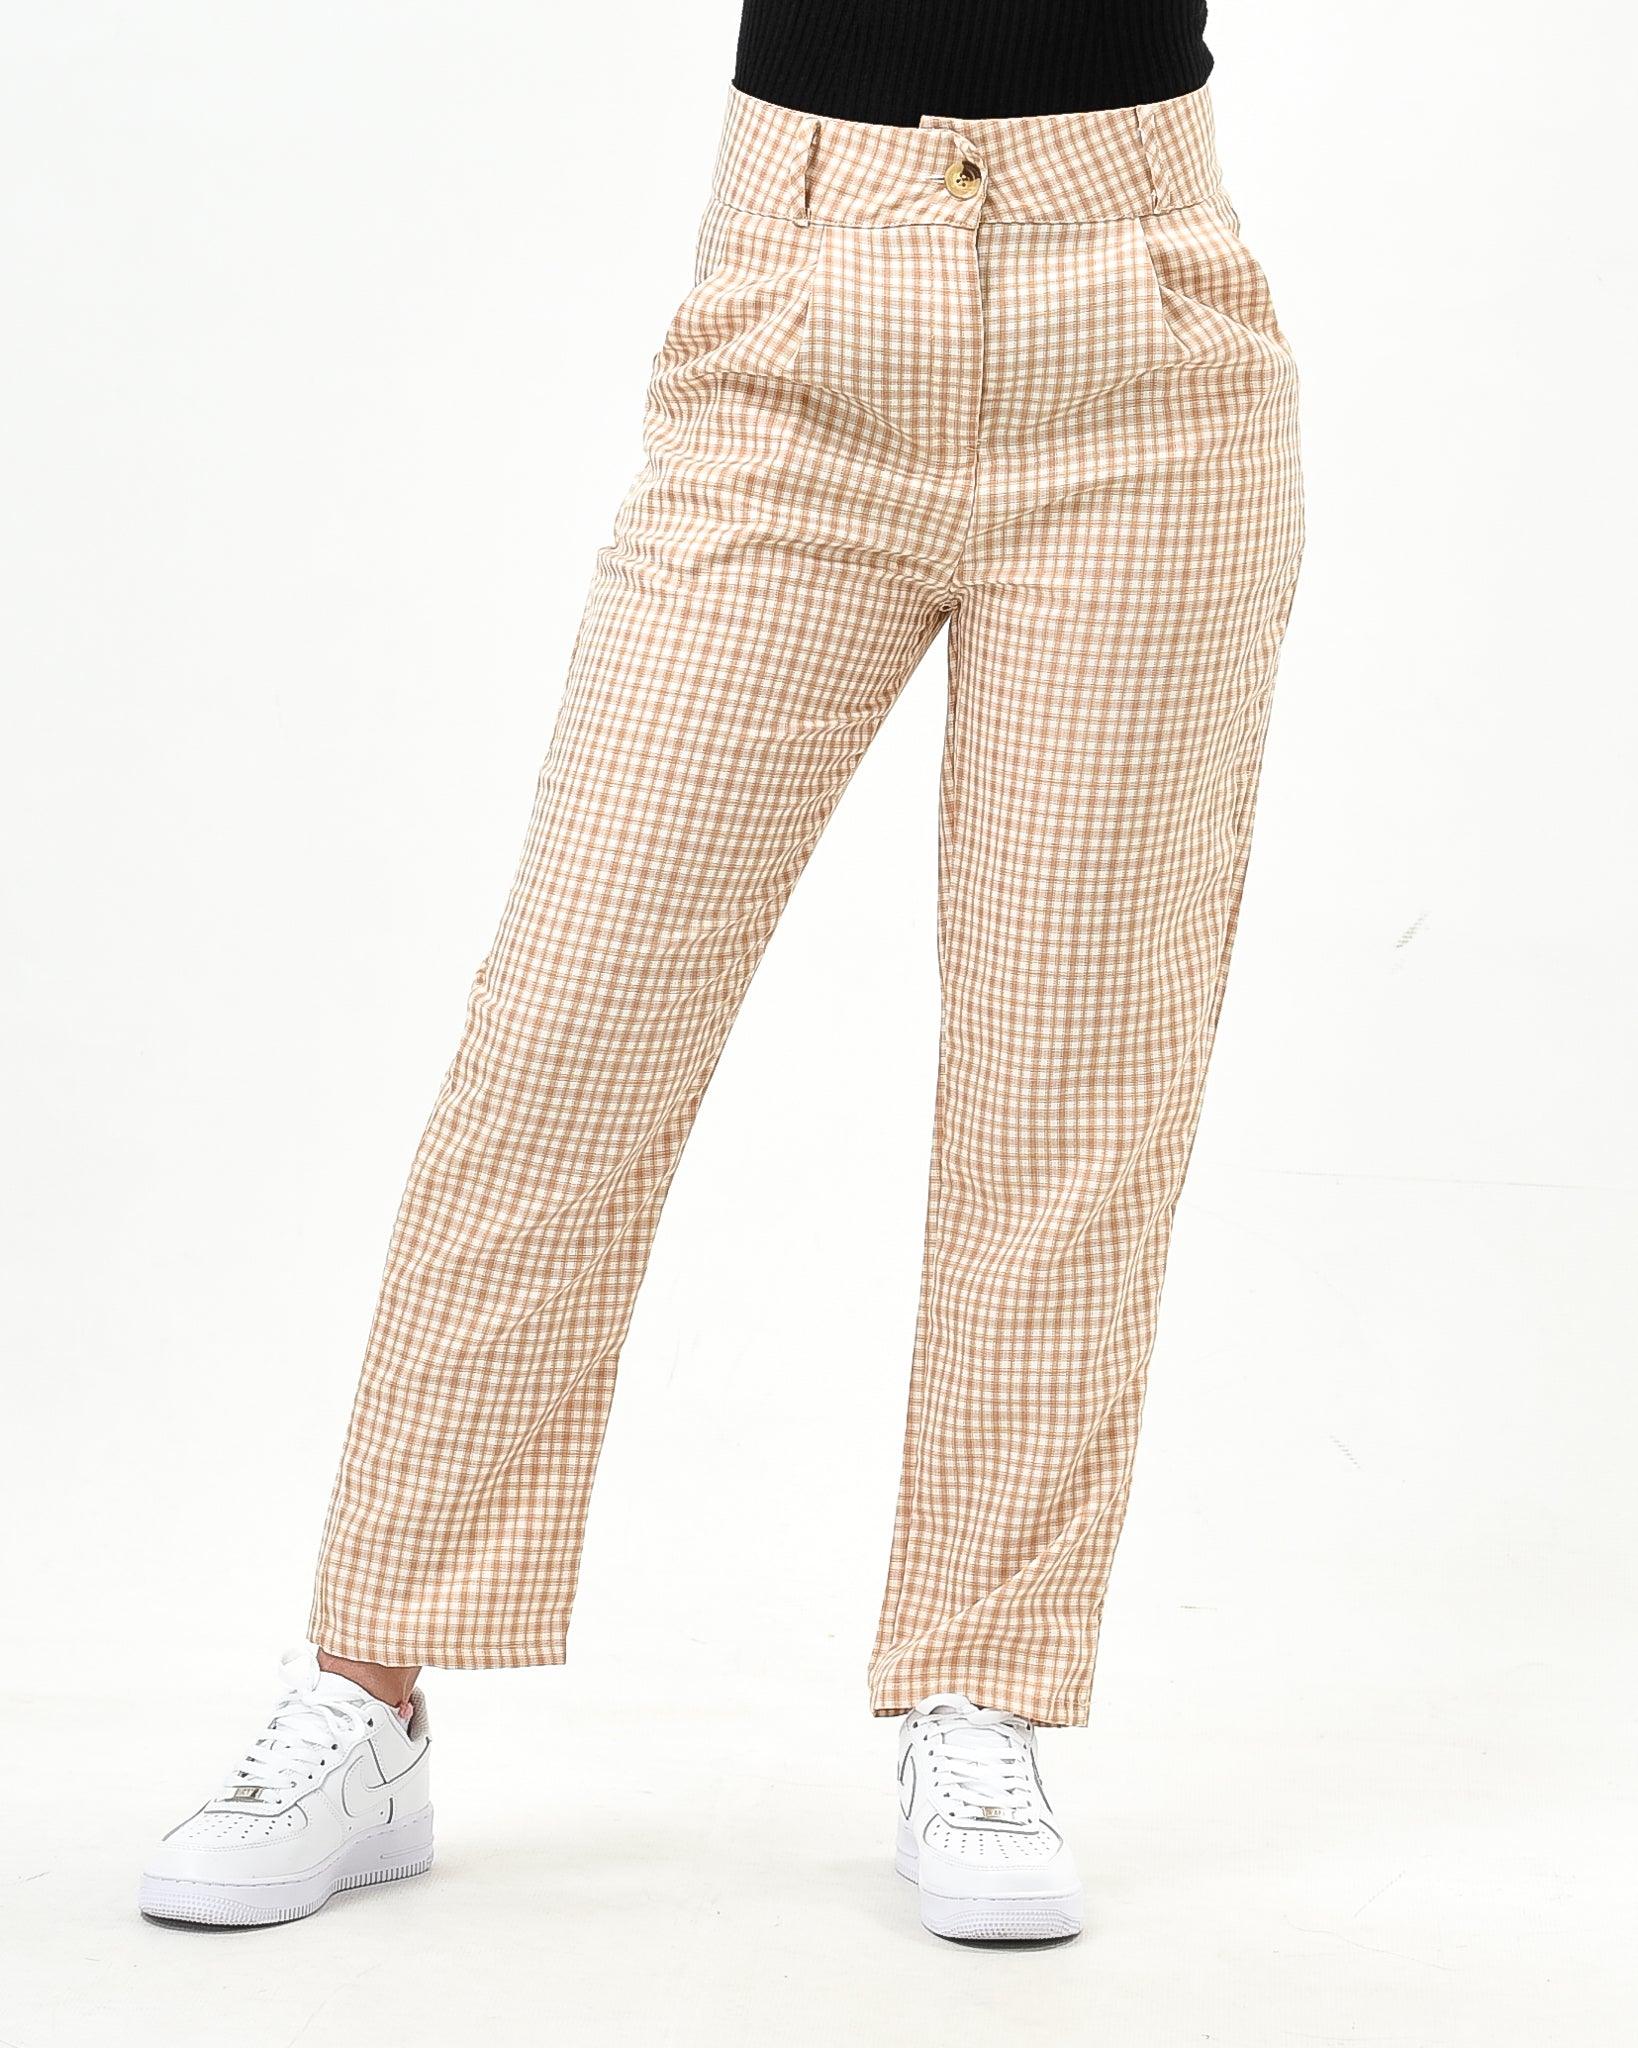 Plaid straight cut pants with pockets - XD21